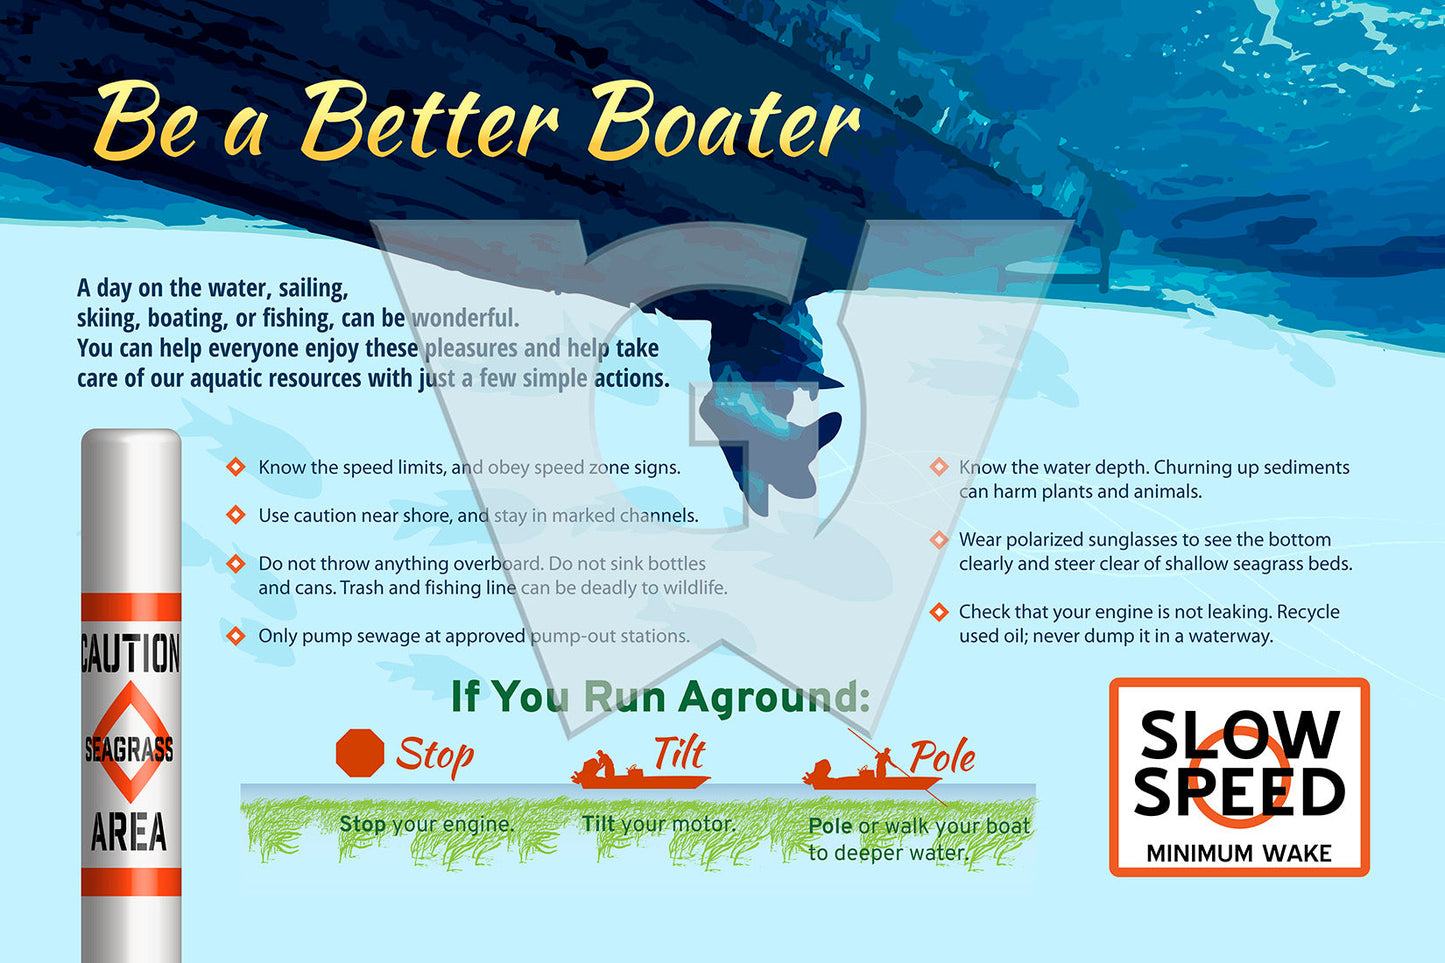 Be a Better Boater